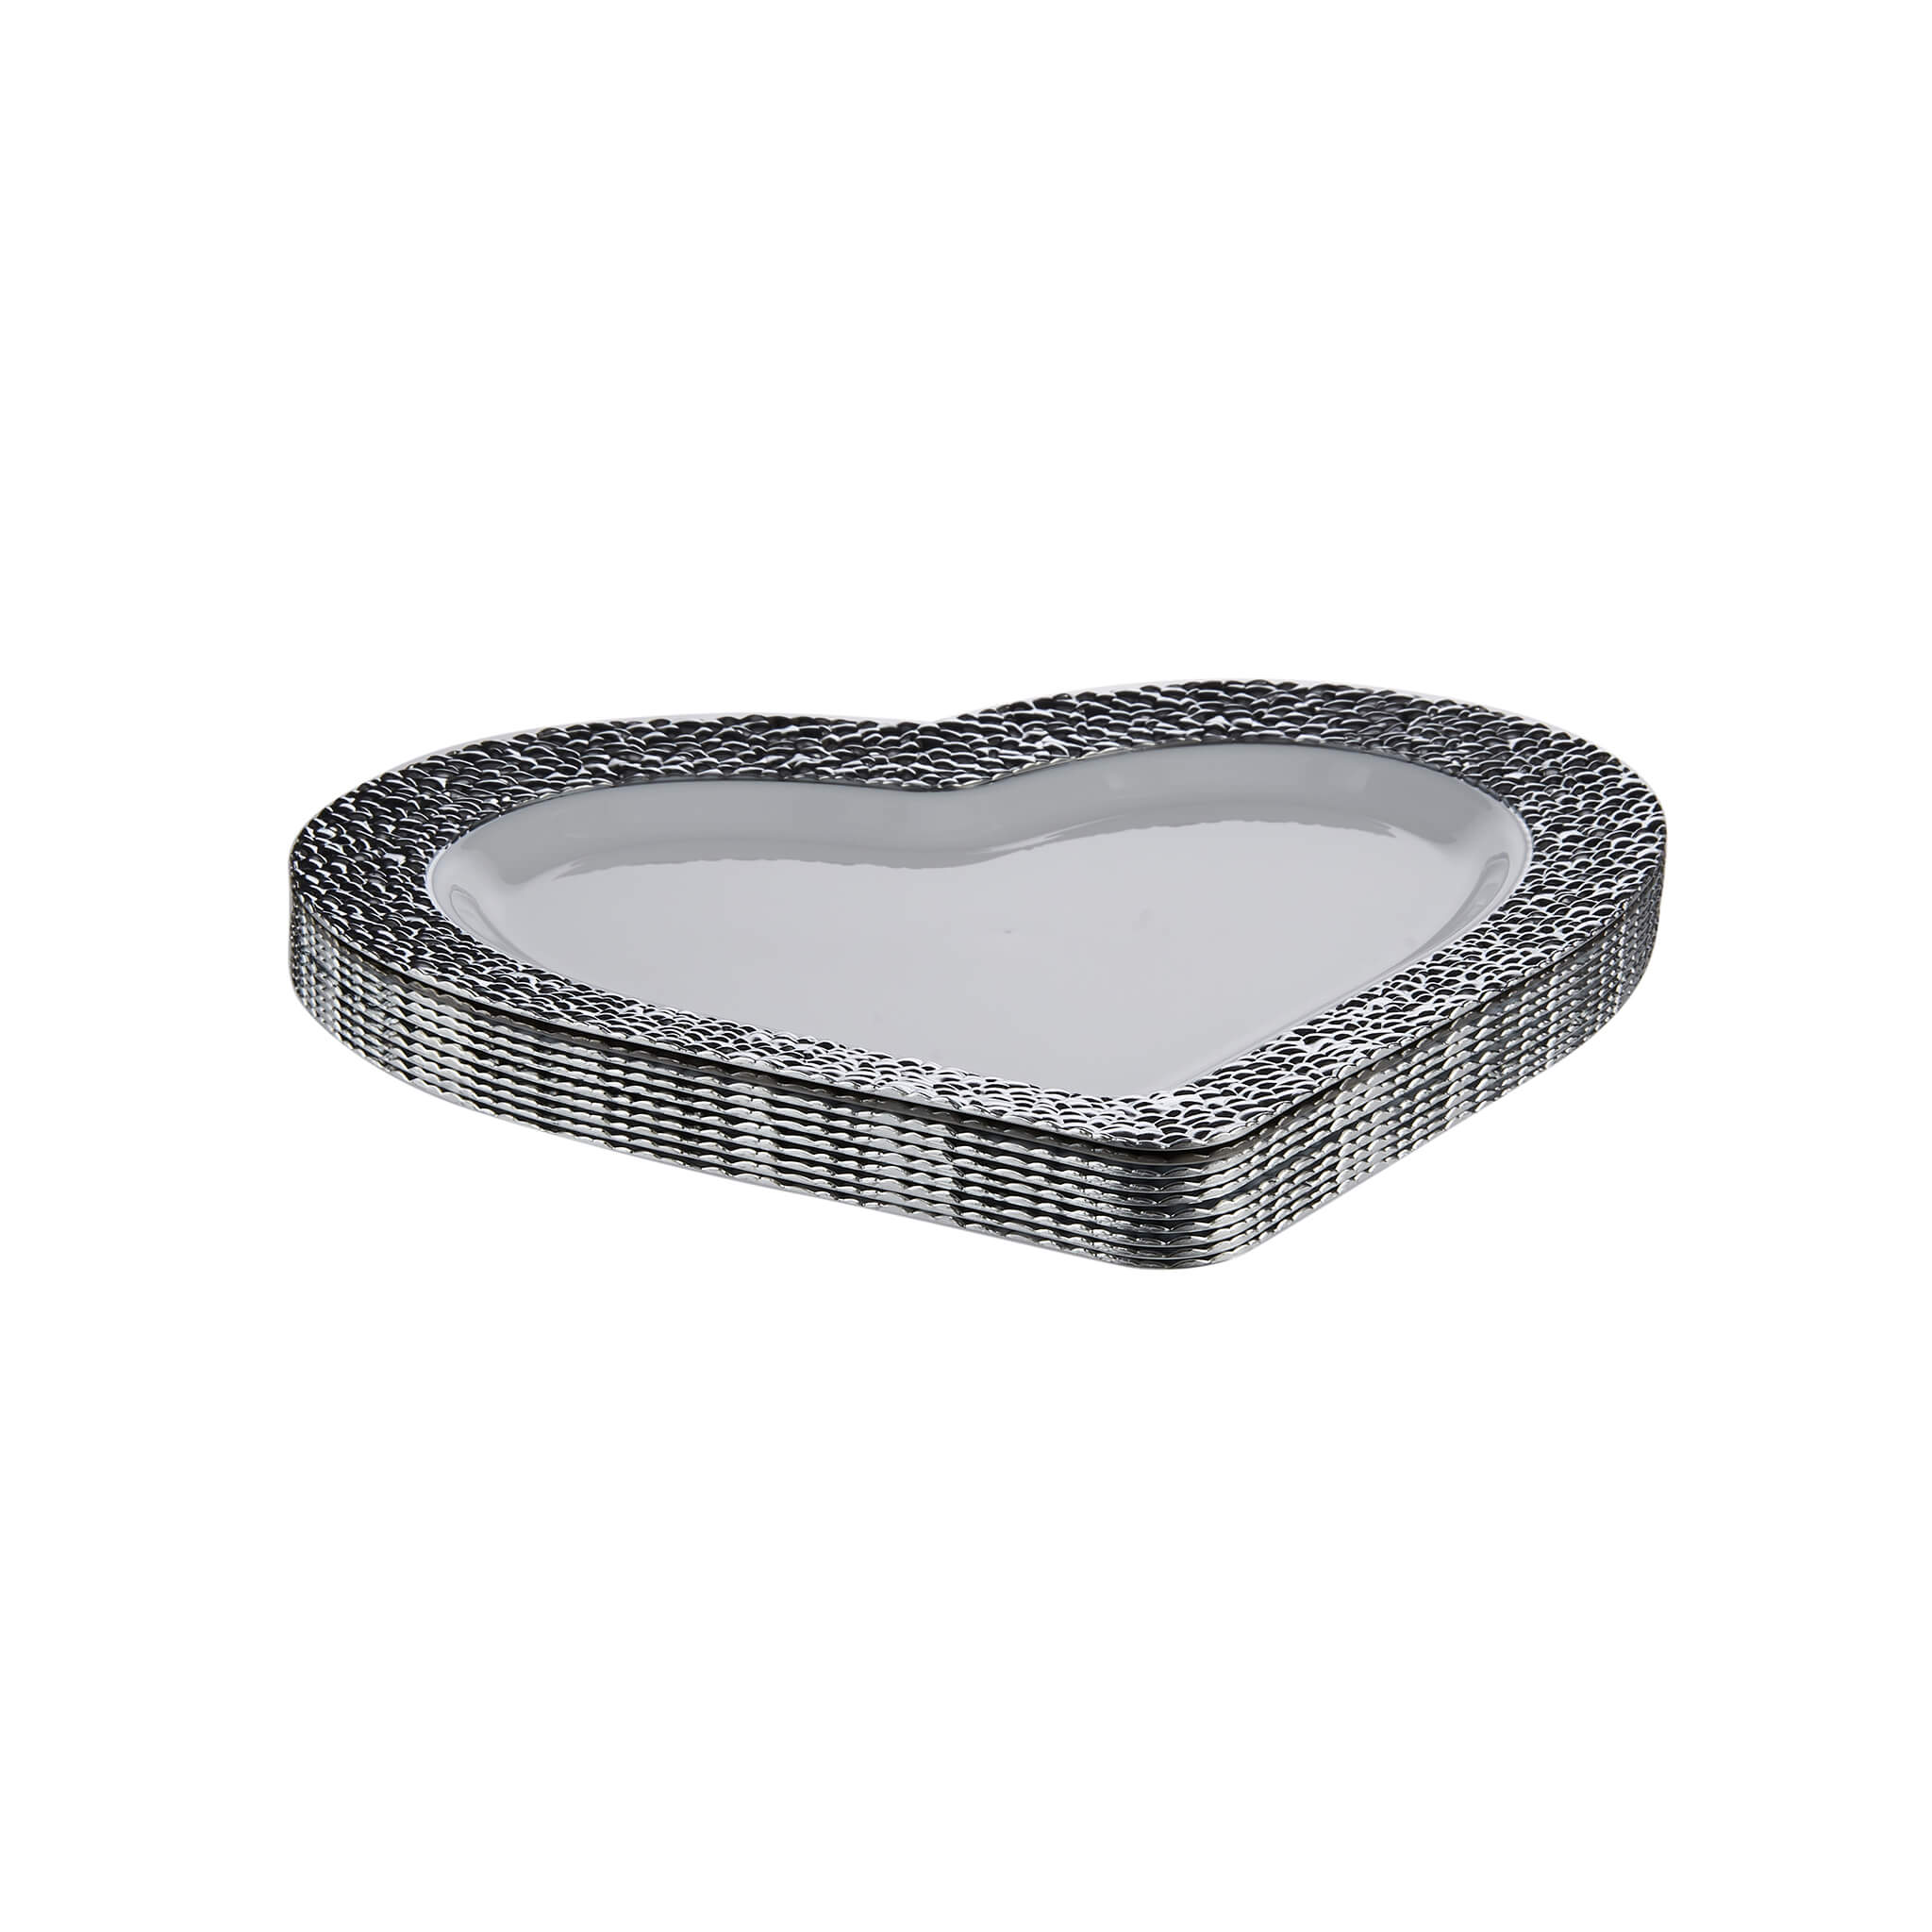 Premium Design Heart Plate with Silver Rim 10 Pieces - Hotpack Global